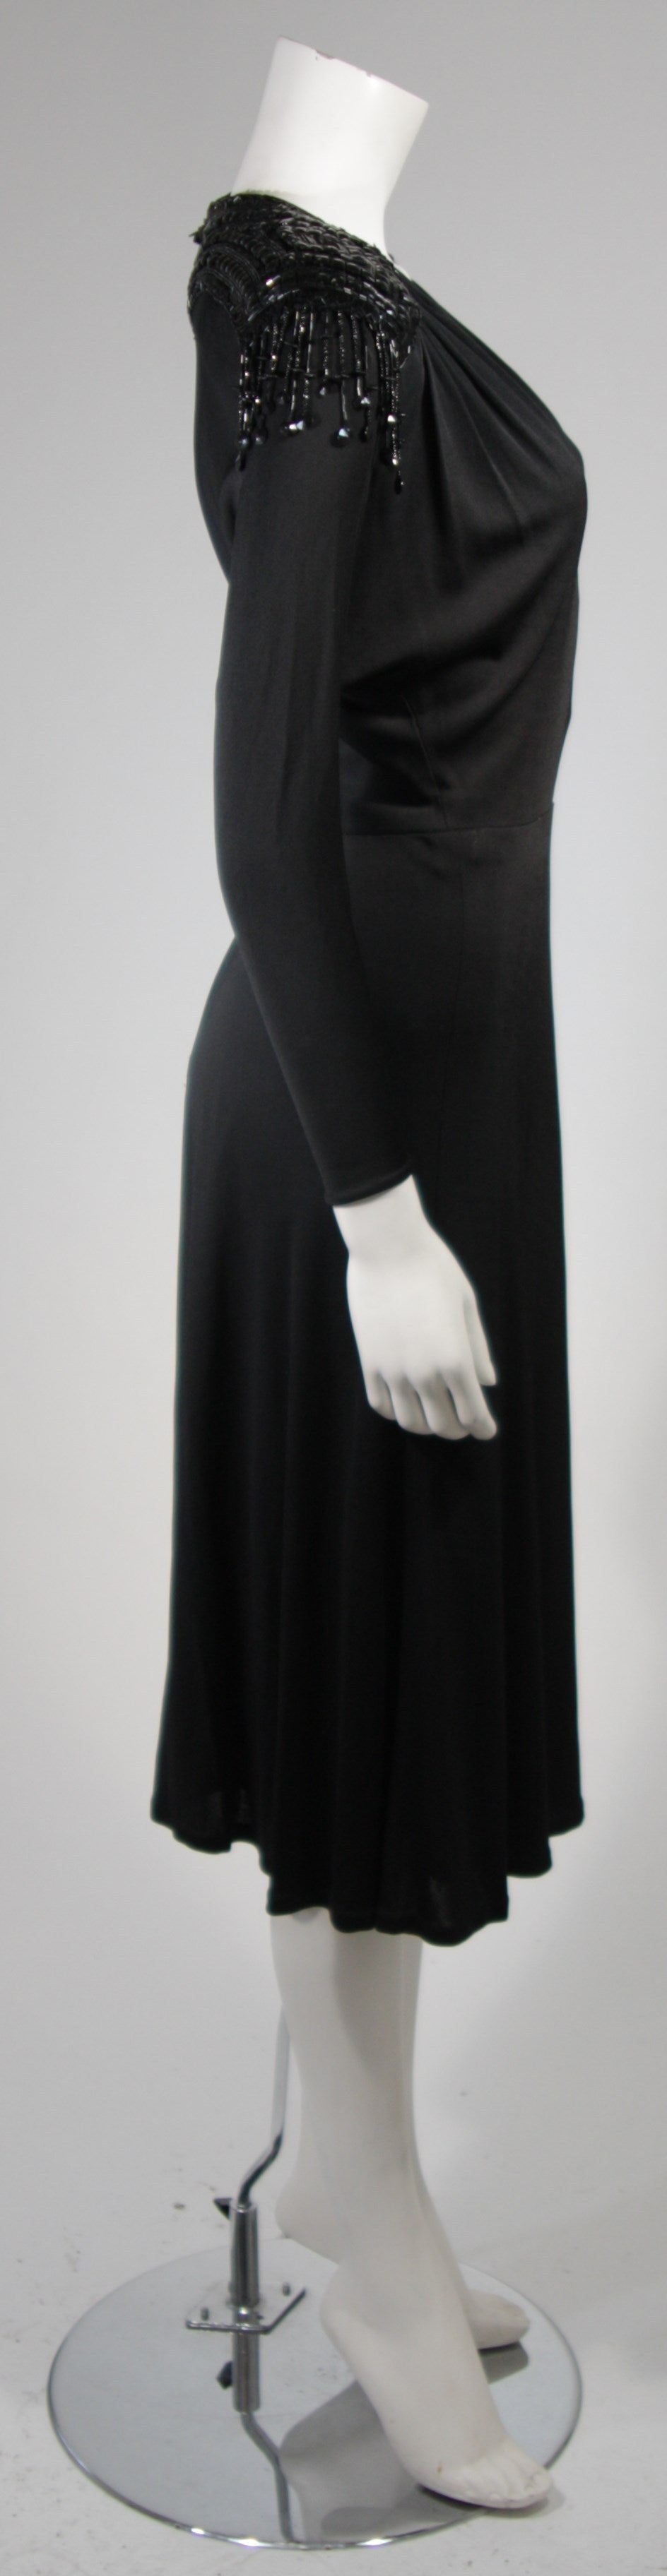 Women's Nolan Miller Attributed Black Jersey Embellished Cocktail Dress Size Small For Sale